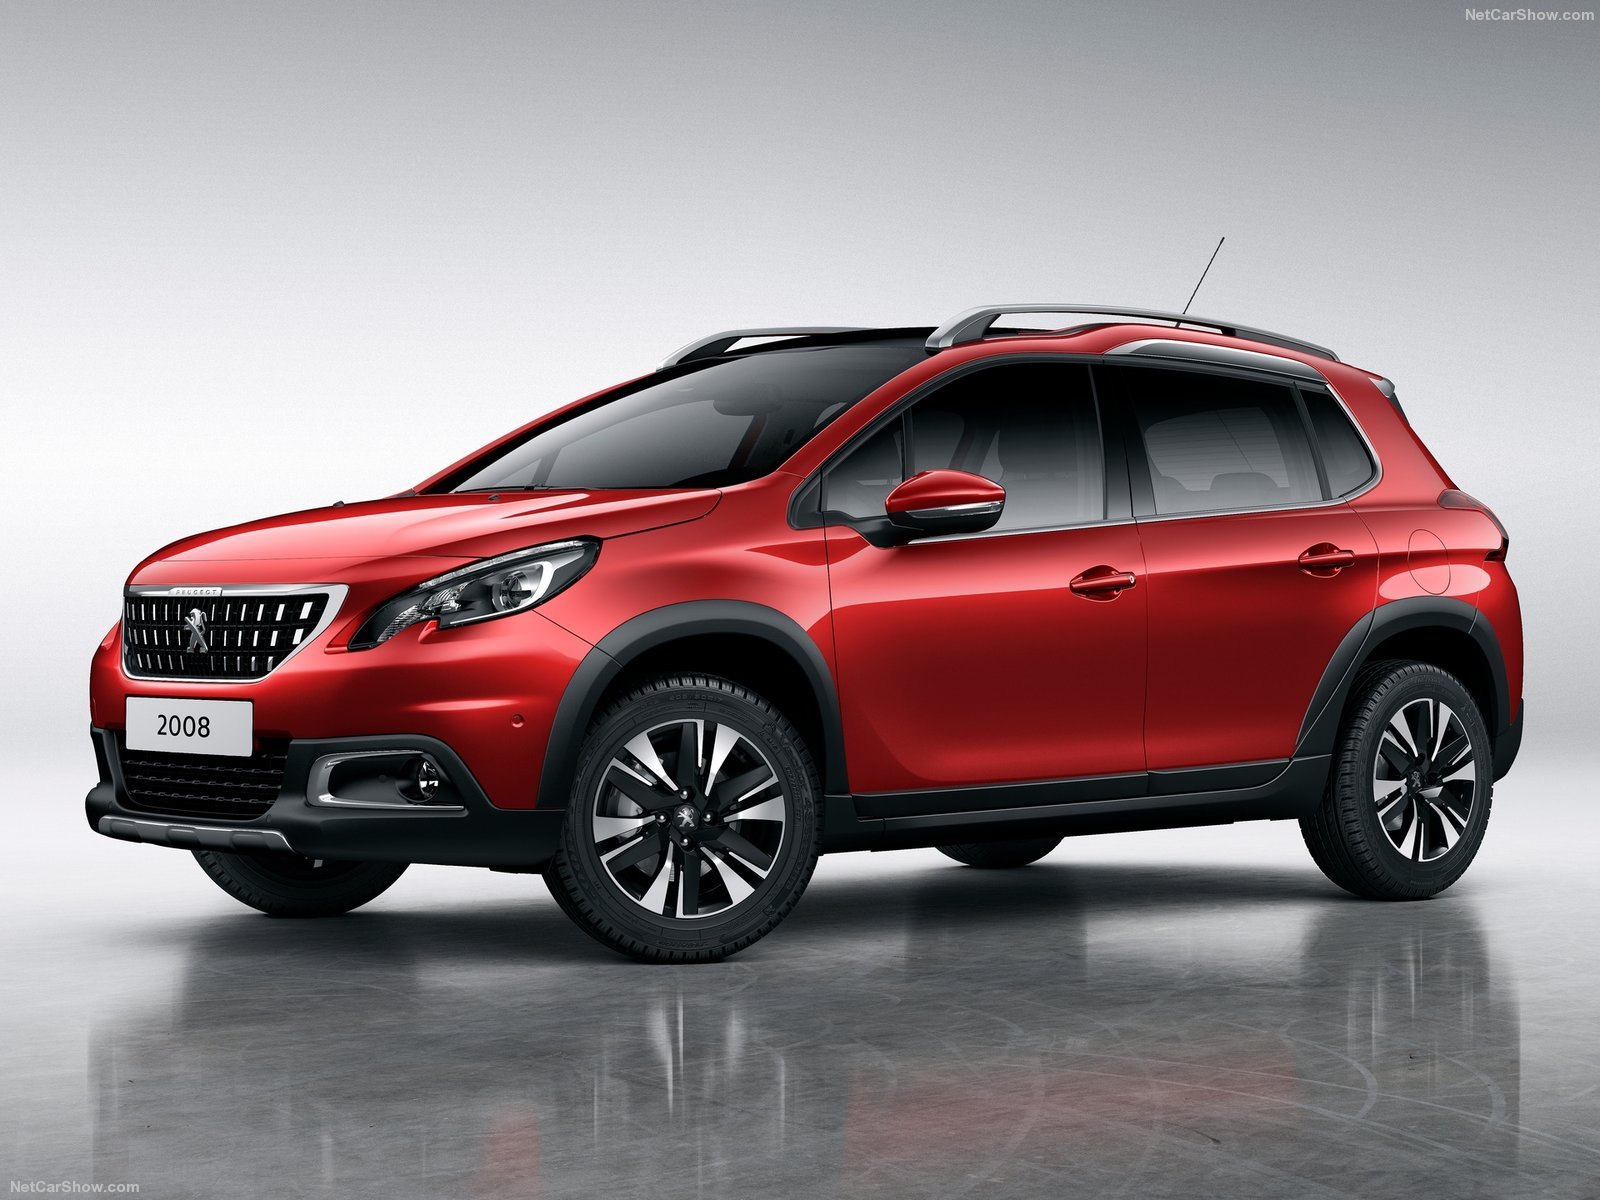 peugeot, 2008, Cars, Red, 2016 Wallpapers HD / Desktop and